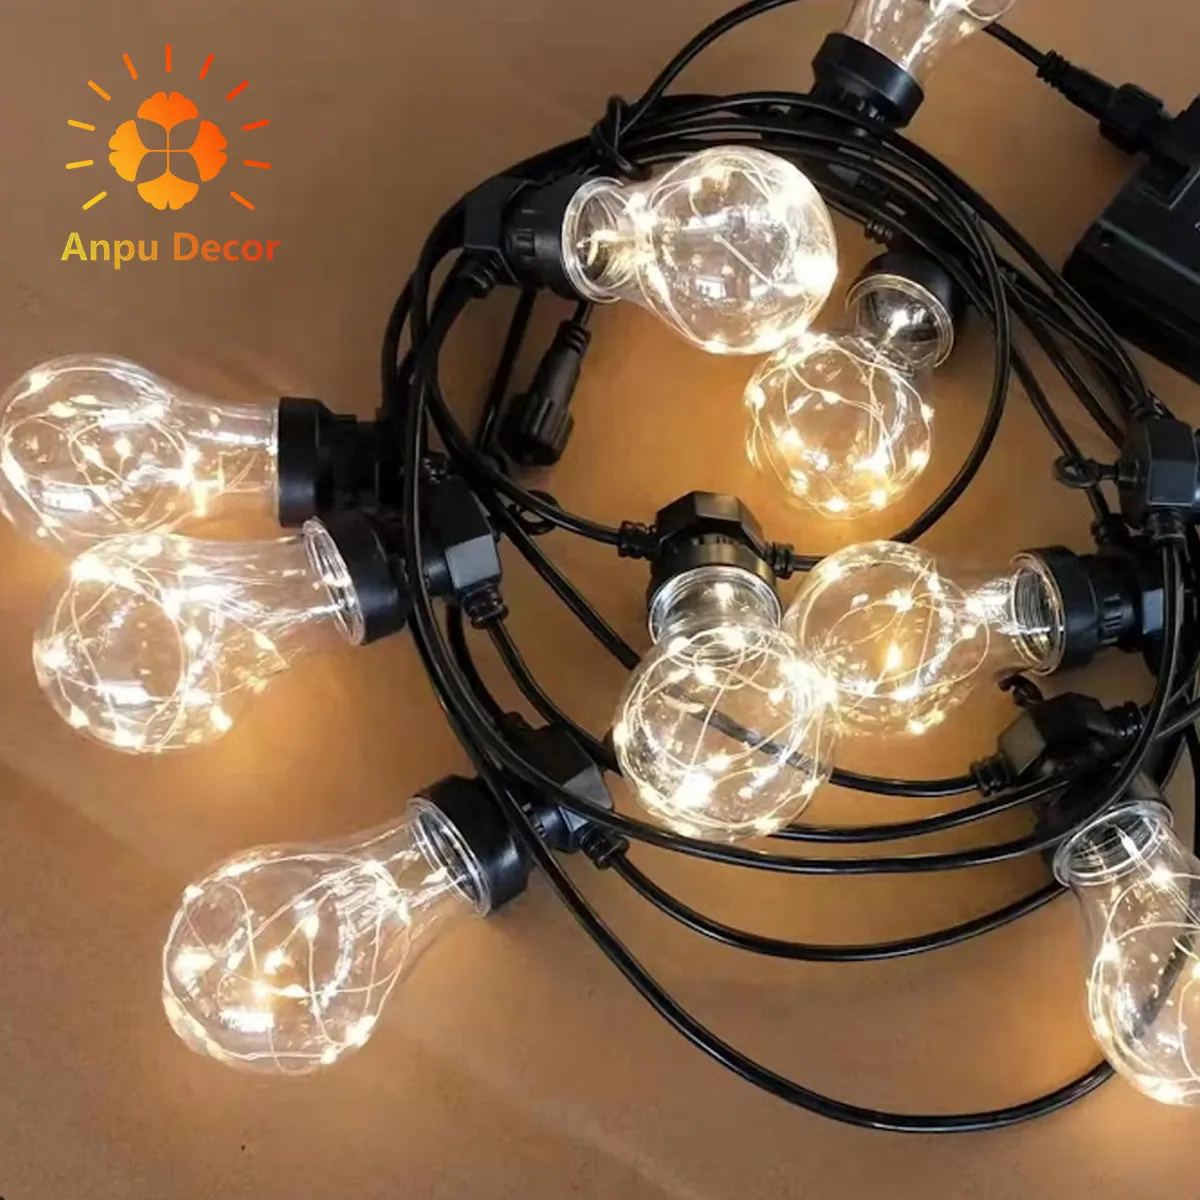 commercial grade patio light with 10 bulbs outdoor waterproof solar powered led string lights